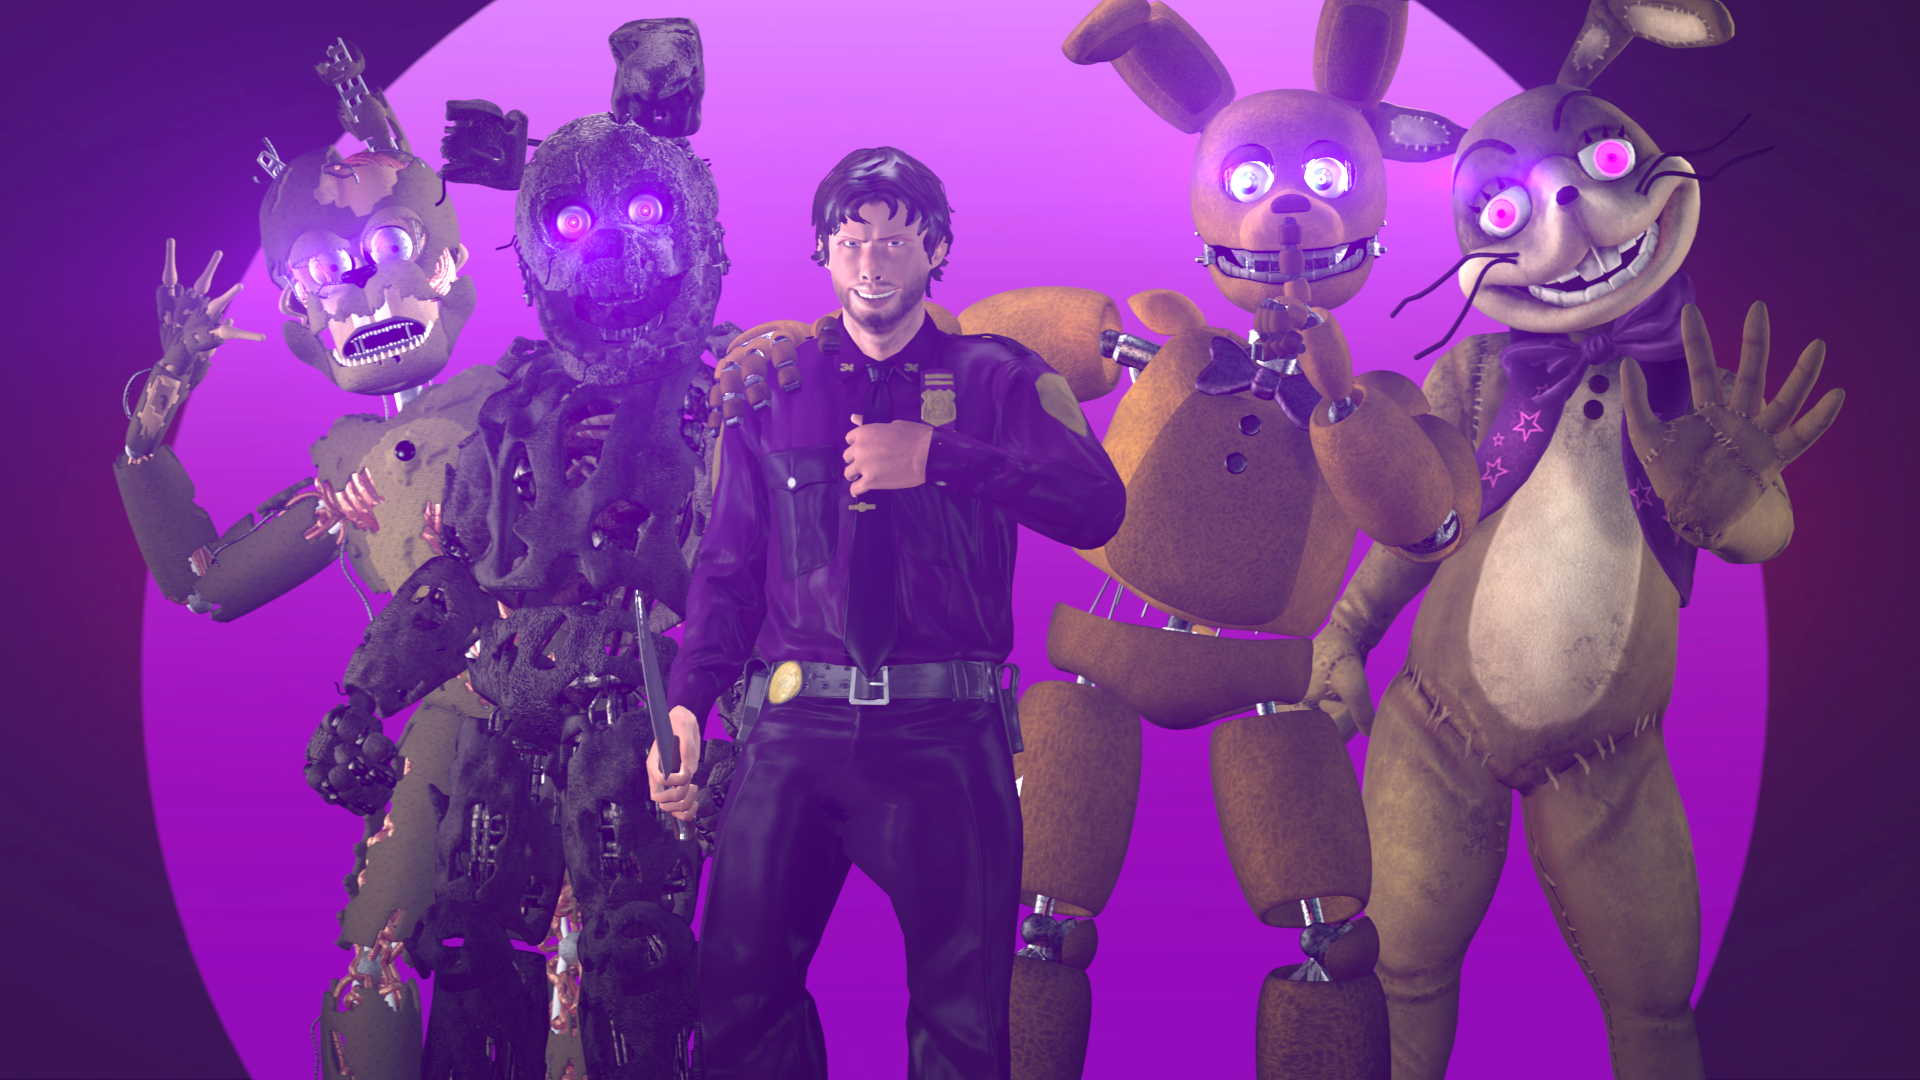 We always come back (Now with glitchtrap) [SFM]